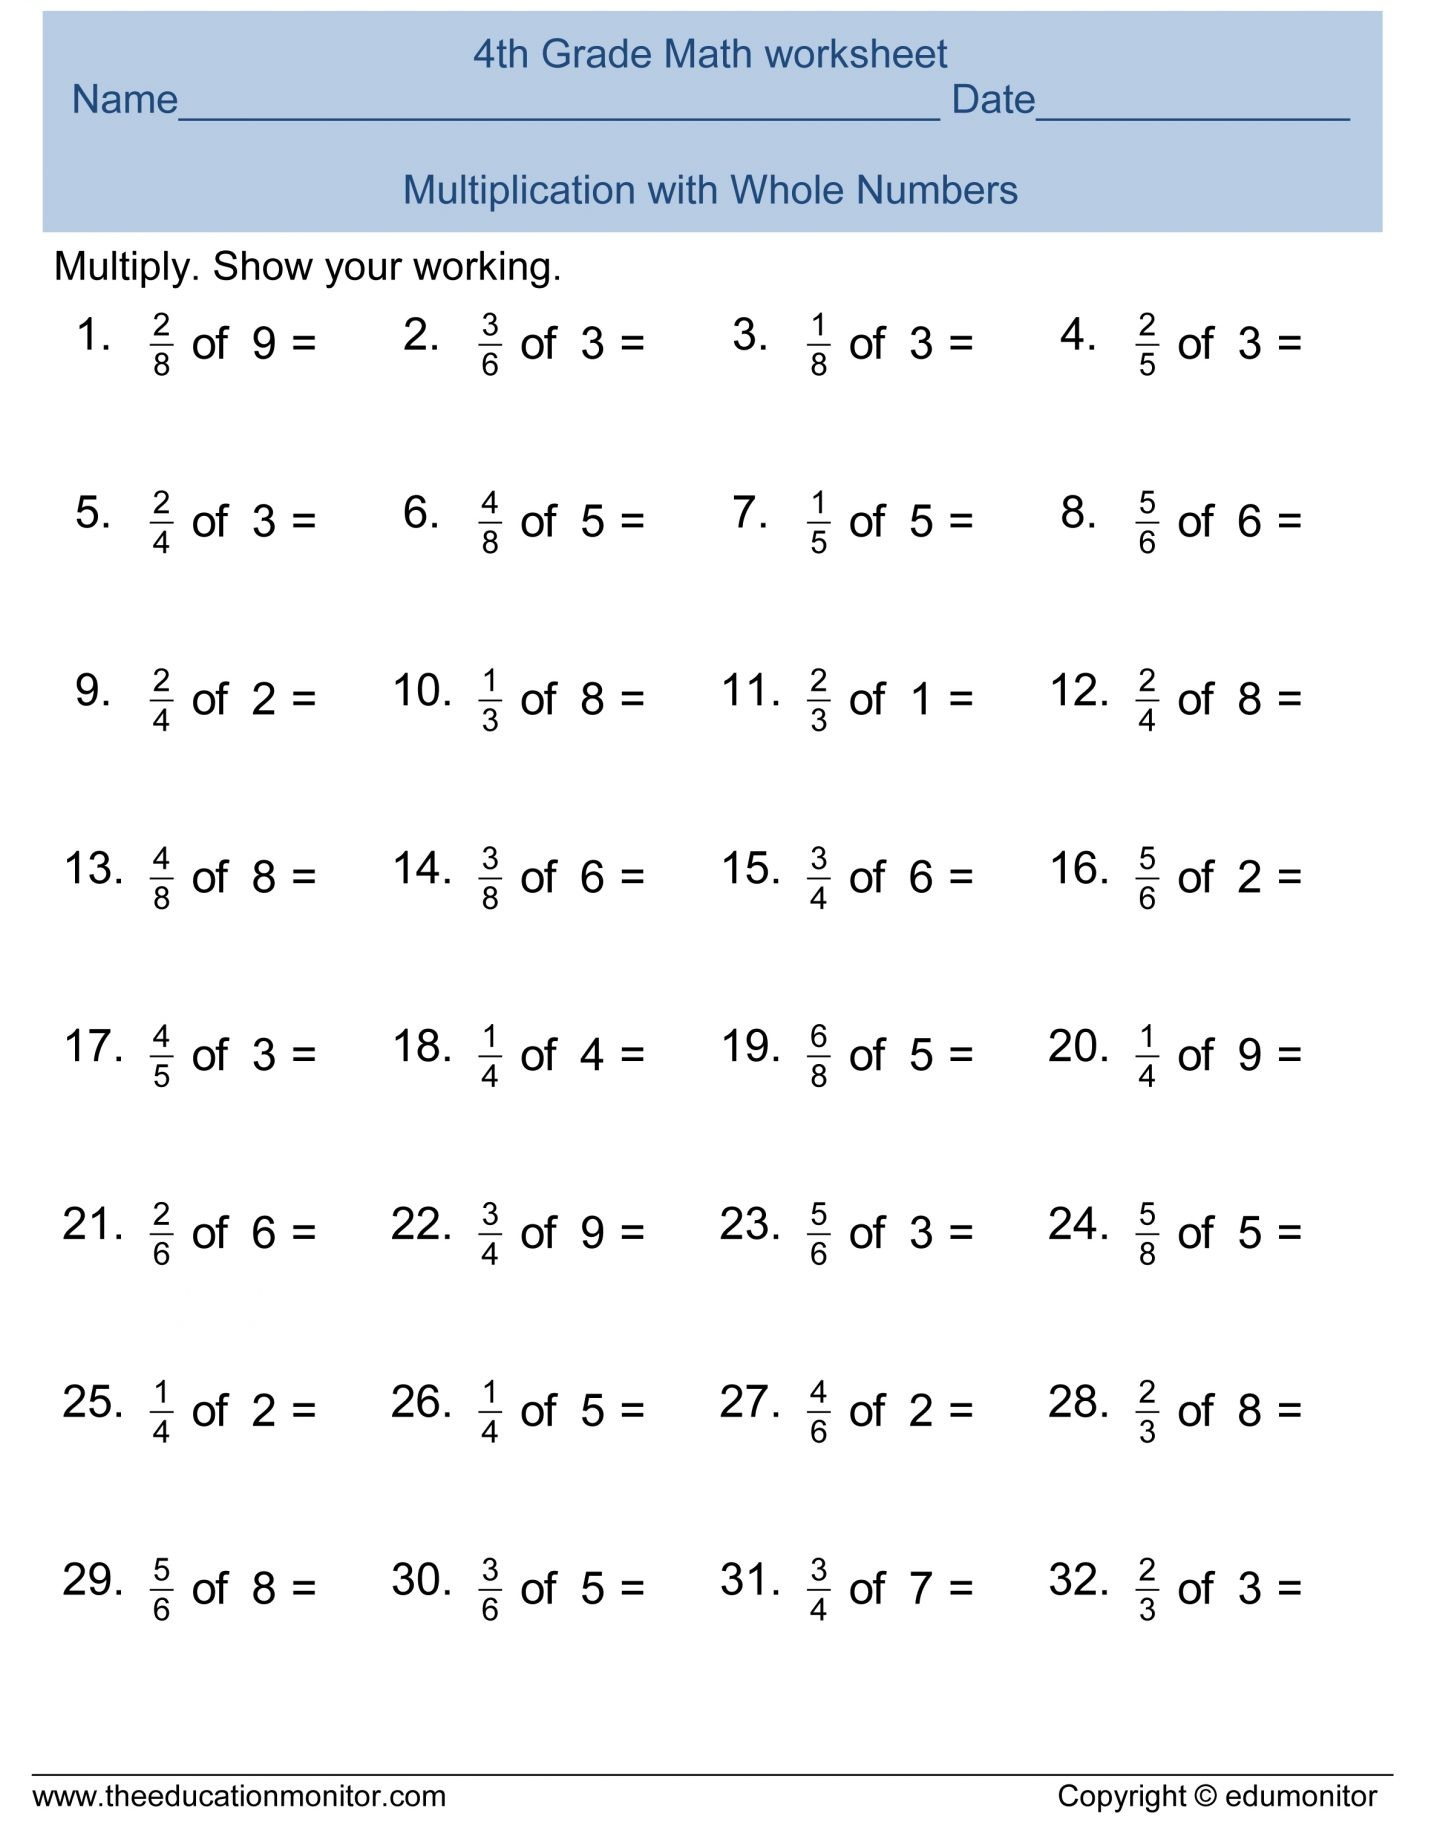 7Th Grade Math Worksheets Free Printable With Answers Stunning - 7Th | 7Th Grade Math Printable Worksheets With Answers